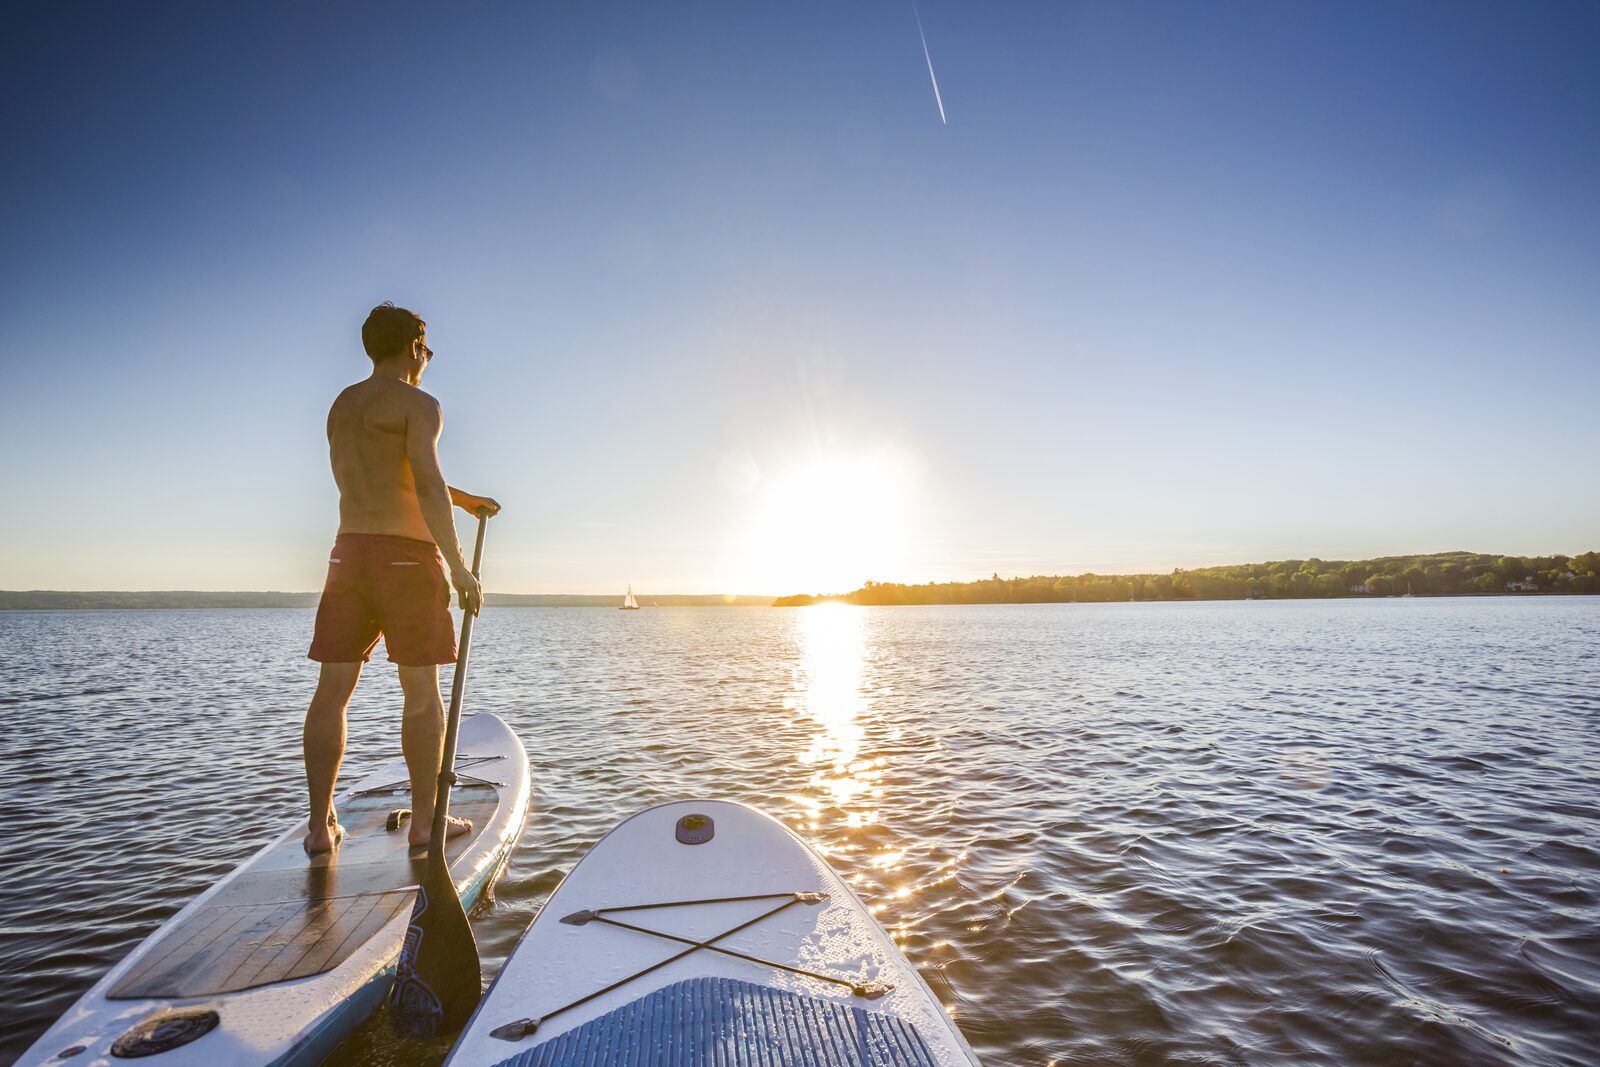 Activities in Ouddorp - paddle boarding on Lake Grevelingen